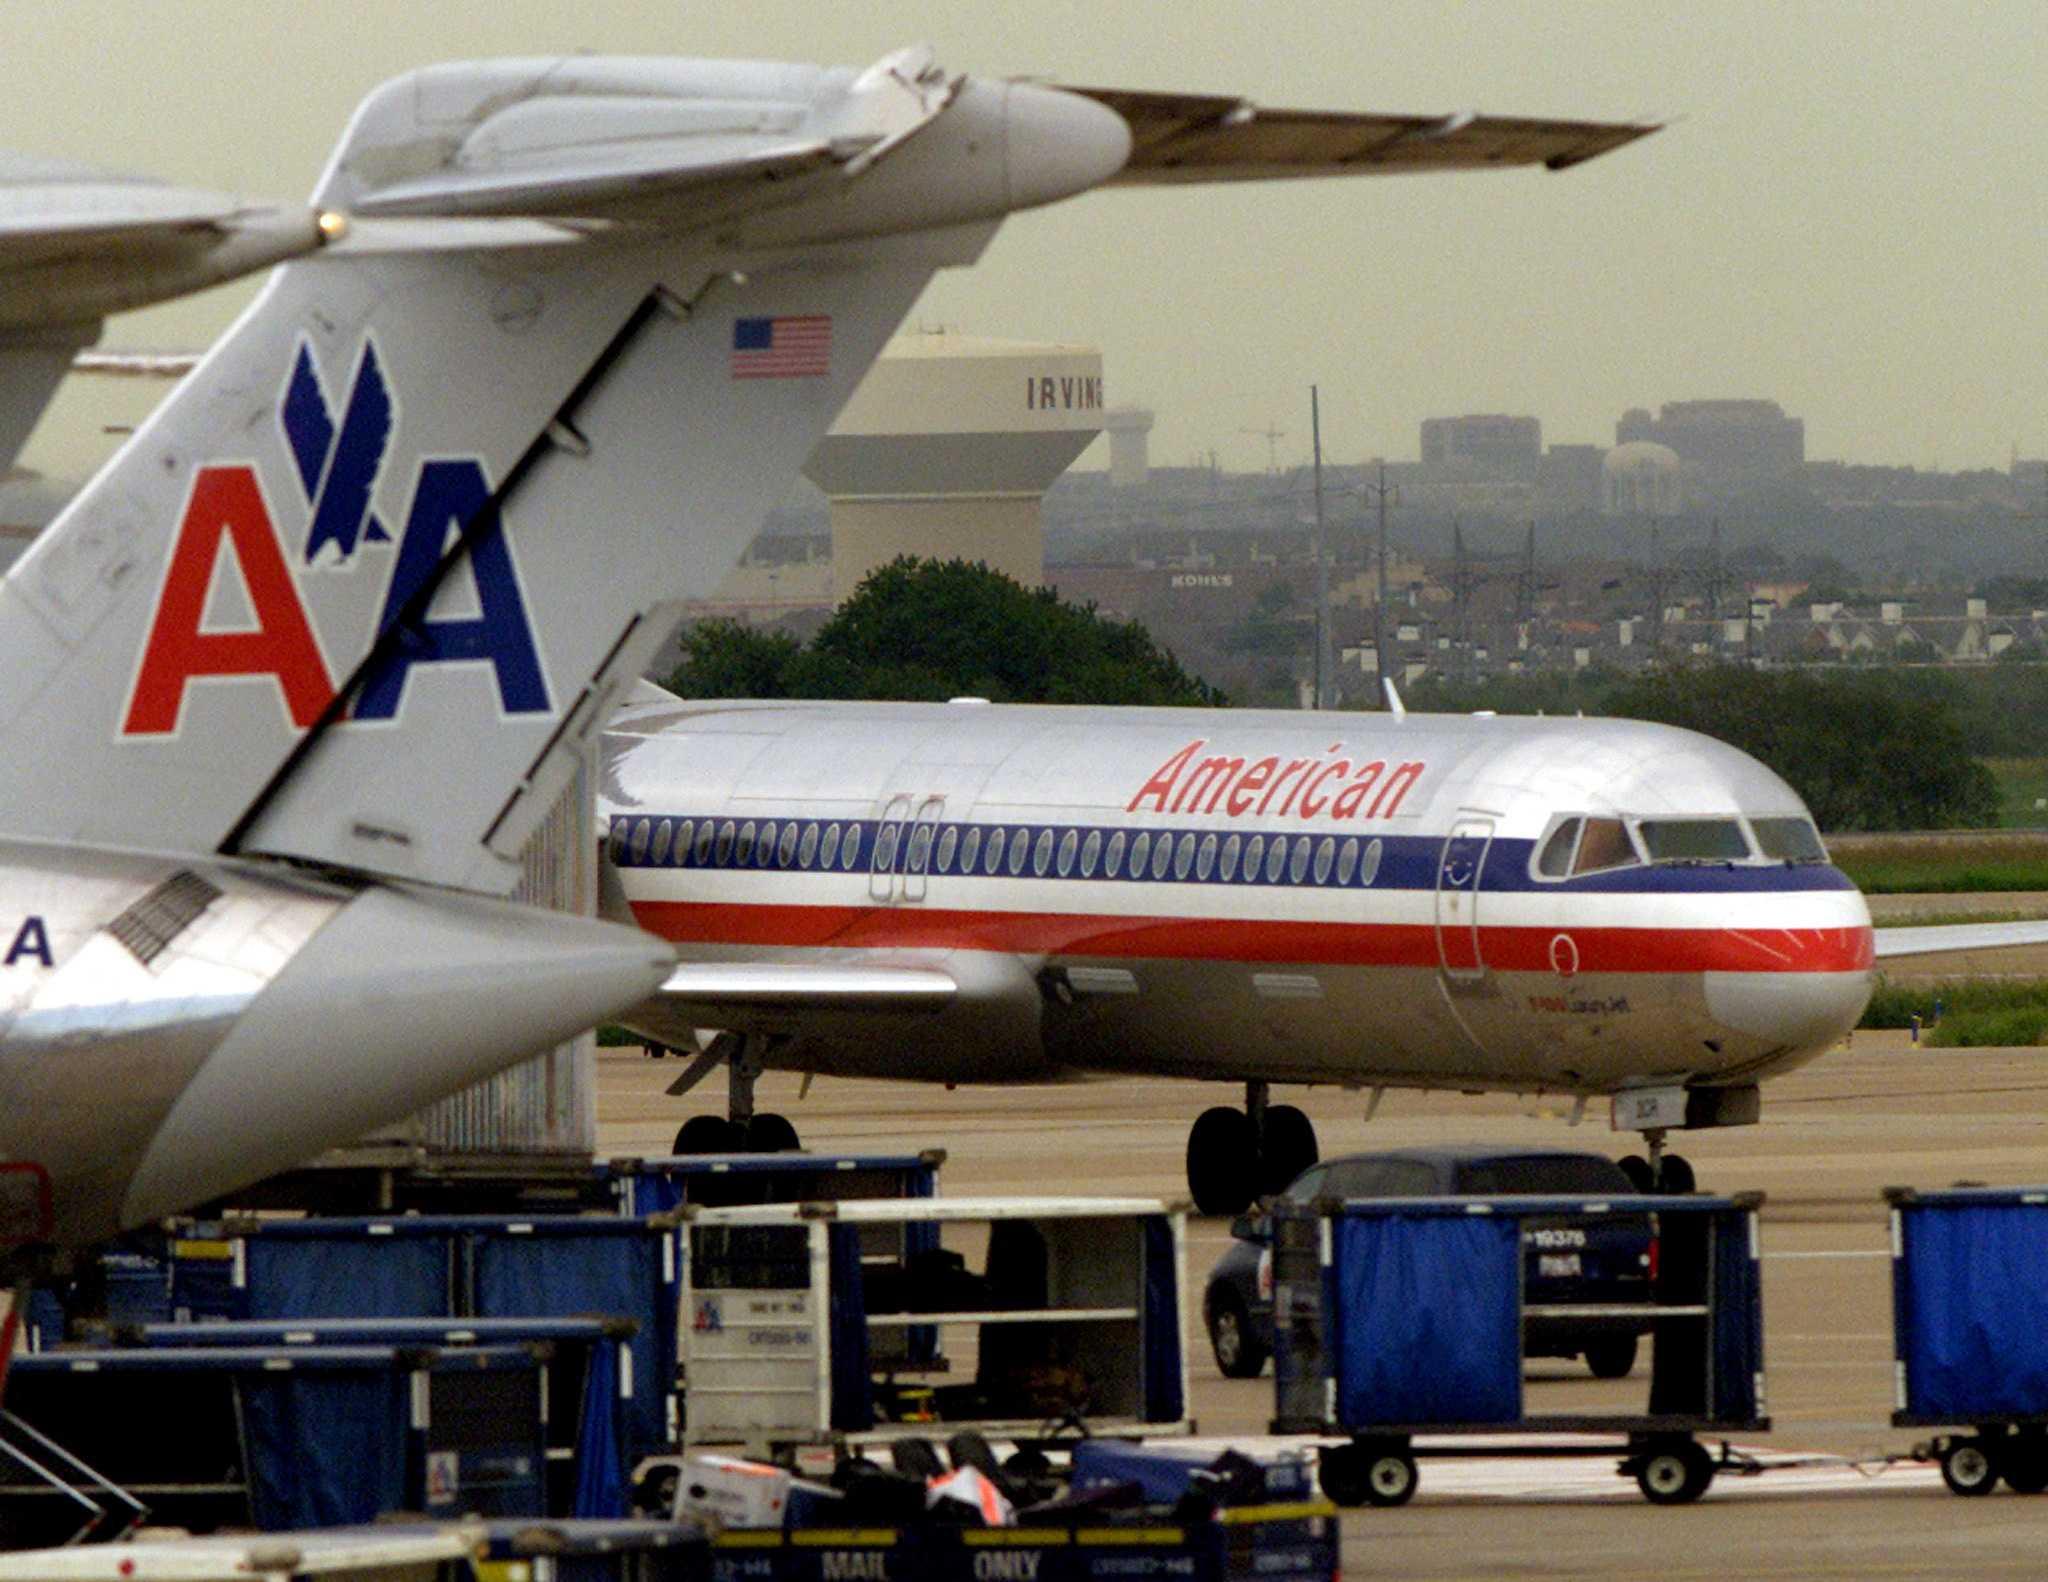 An American Airlines jet pulls into the gate area at Dallas/Fort Worth International Airport in this photo taken Sept 20, 2001. Photo: Reuters